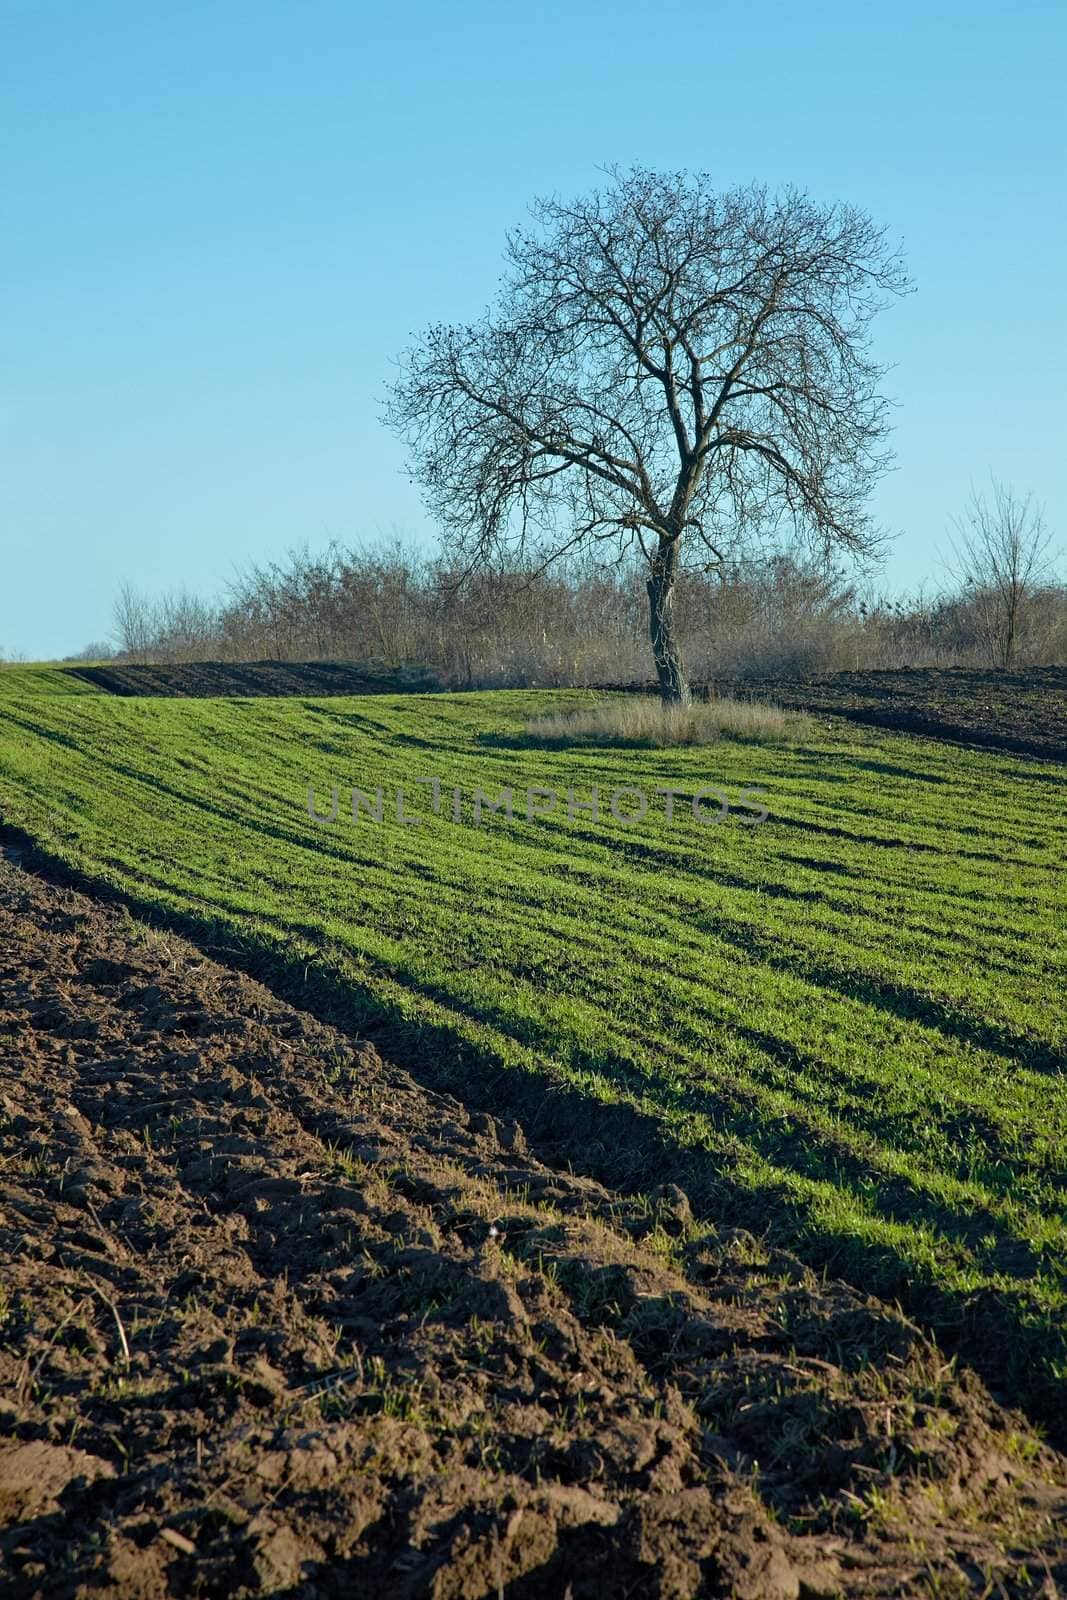 Lonely tree on an agricultural field